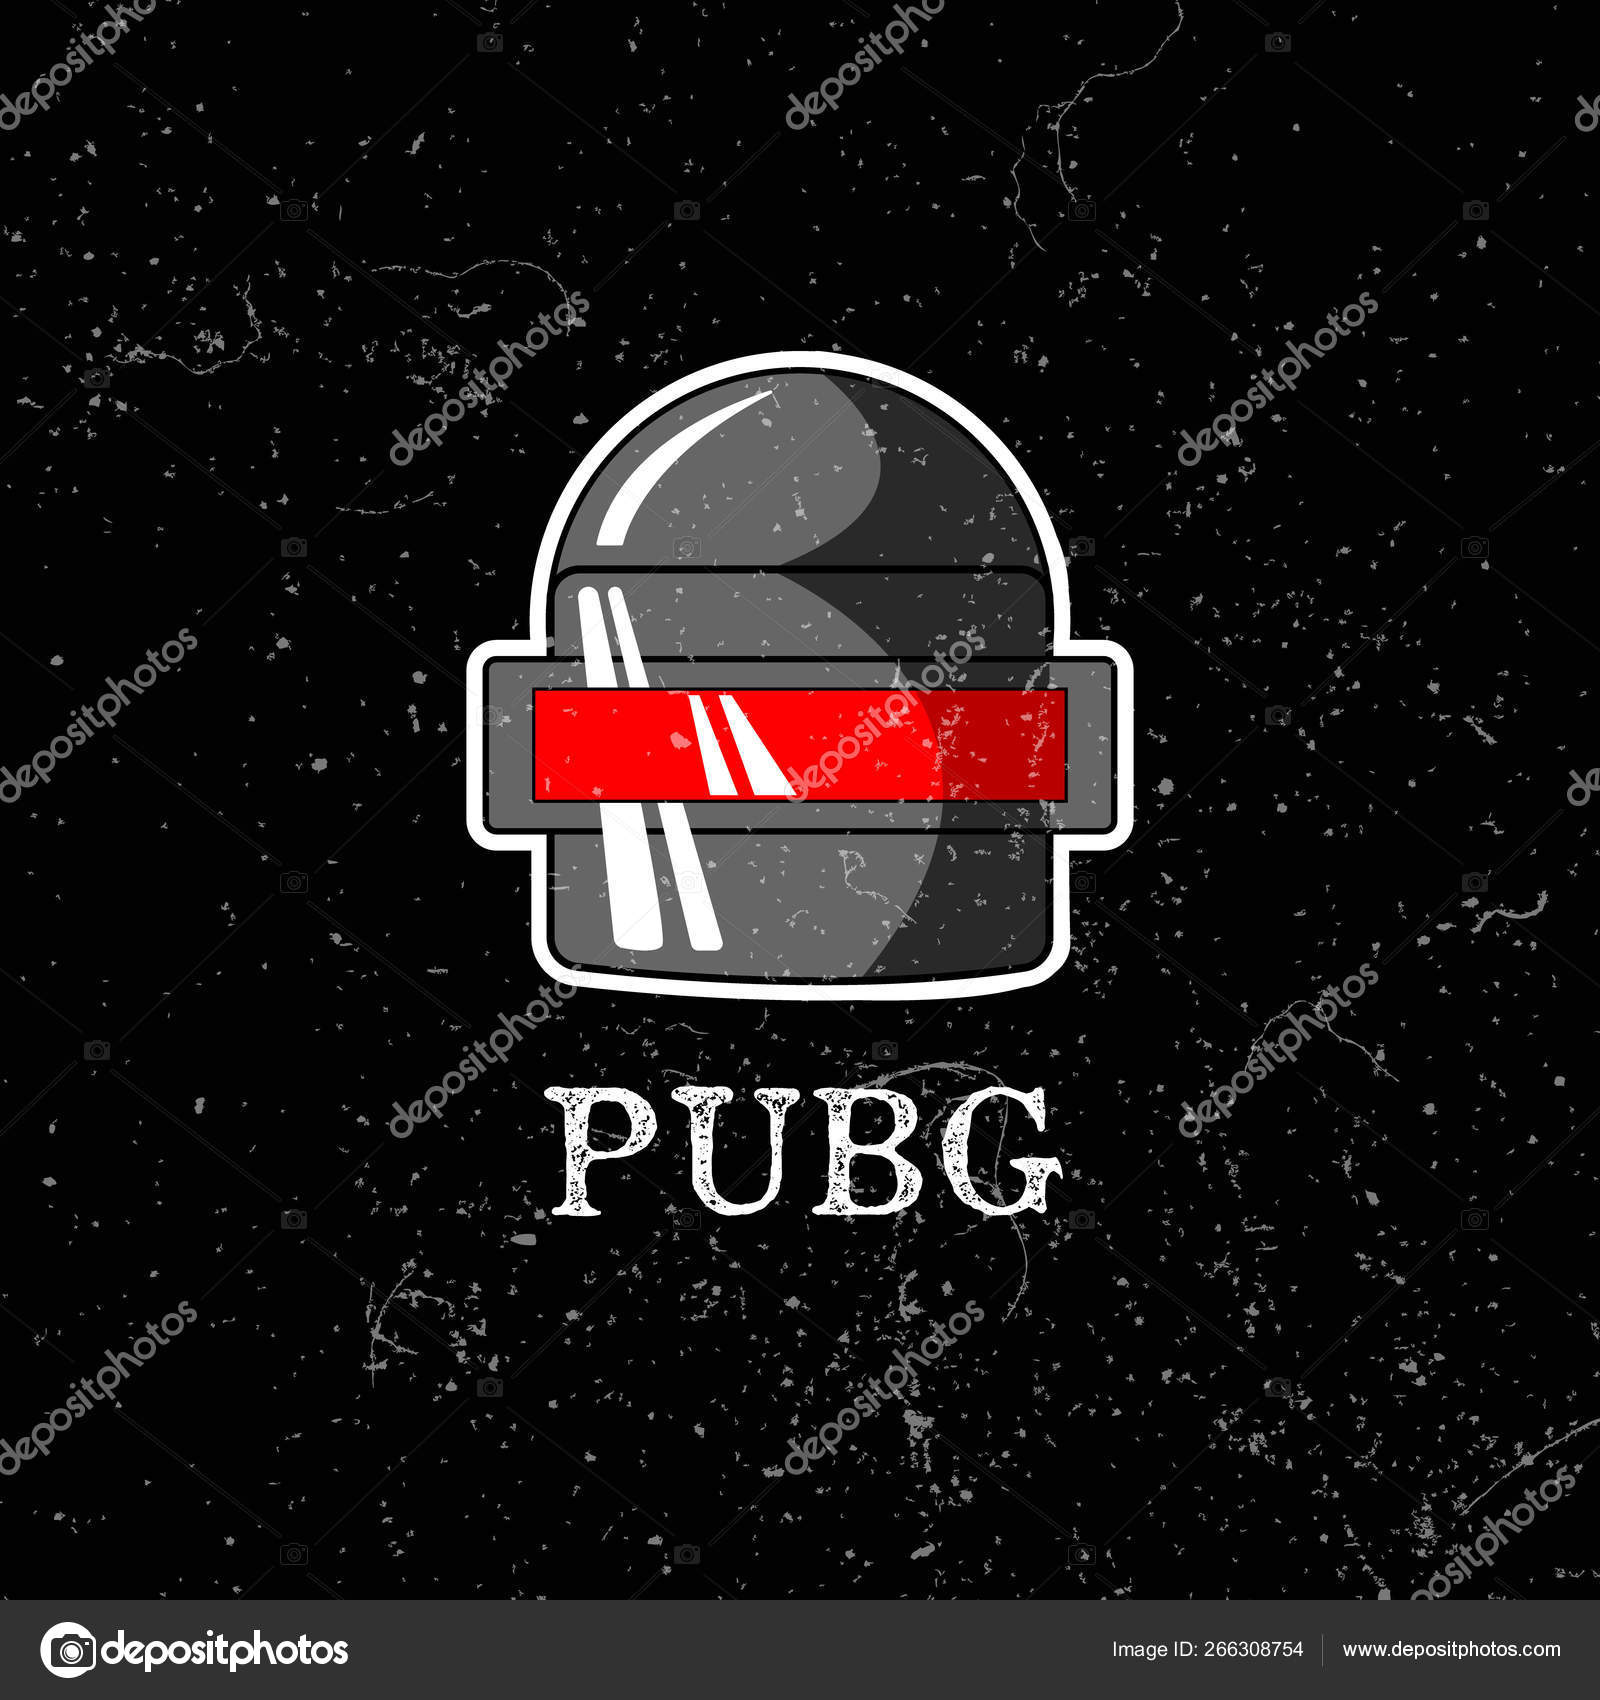 Pubg Playerunknowns Battlegrounds Game Vector Helmet From Playerunknown S Battleground Cartoon Illustration Stock Vector Image By C Mila1717